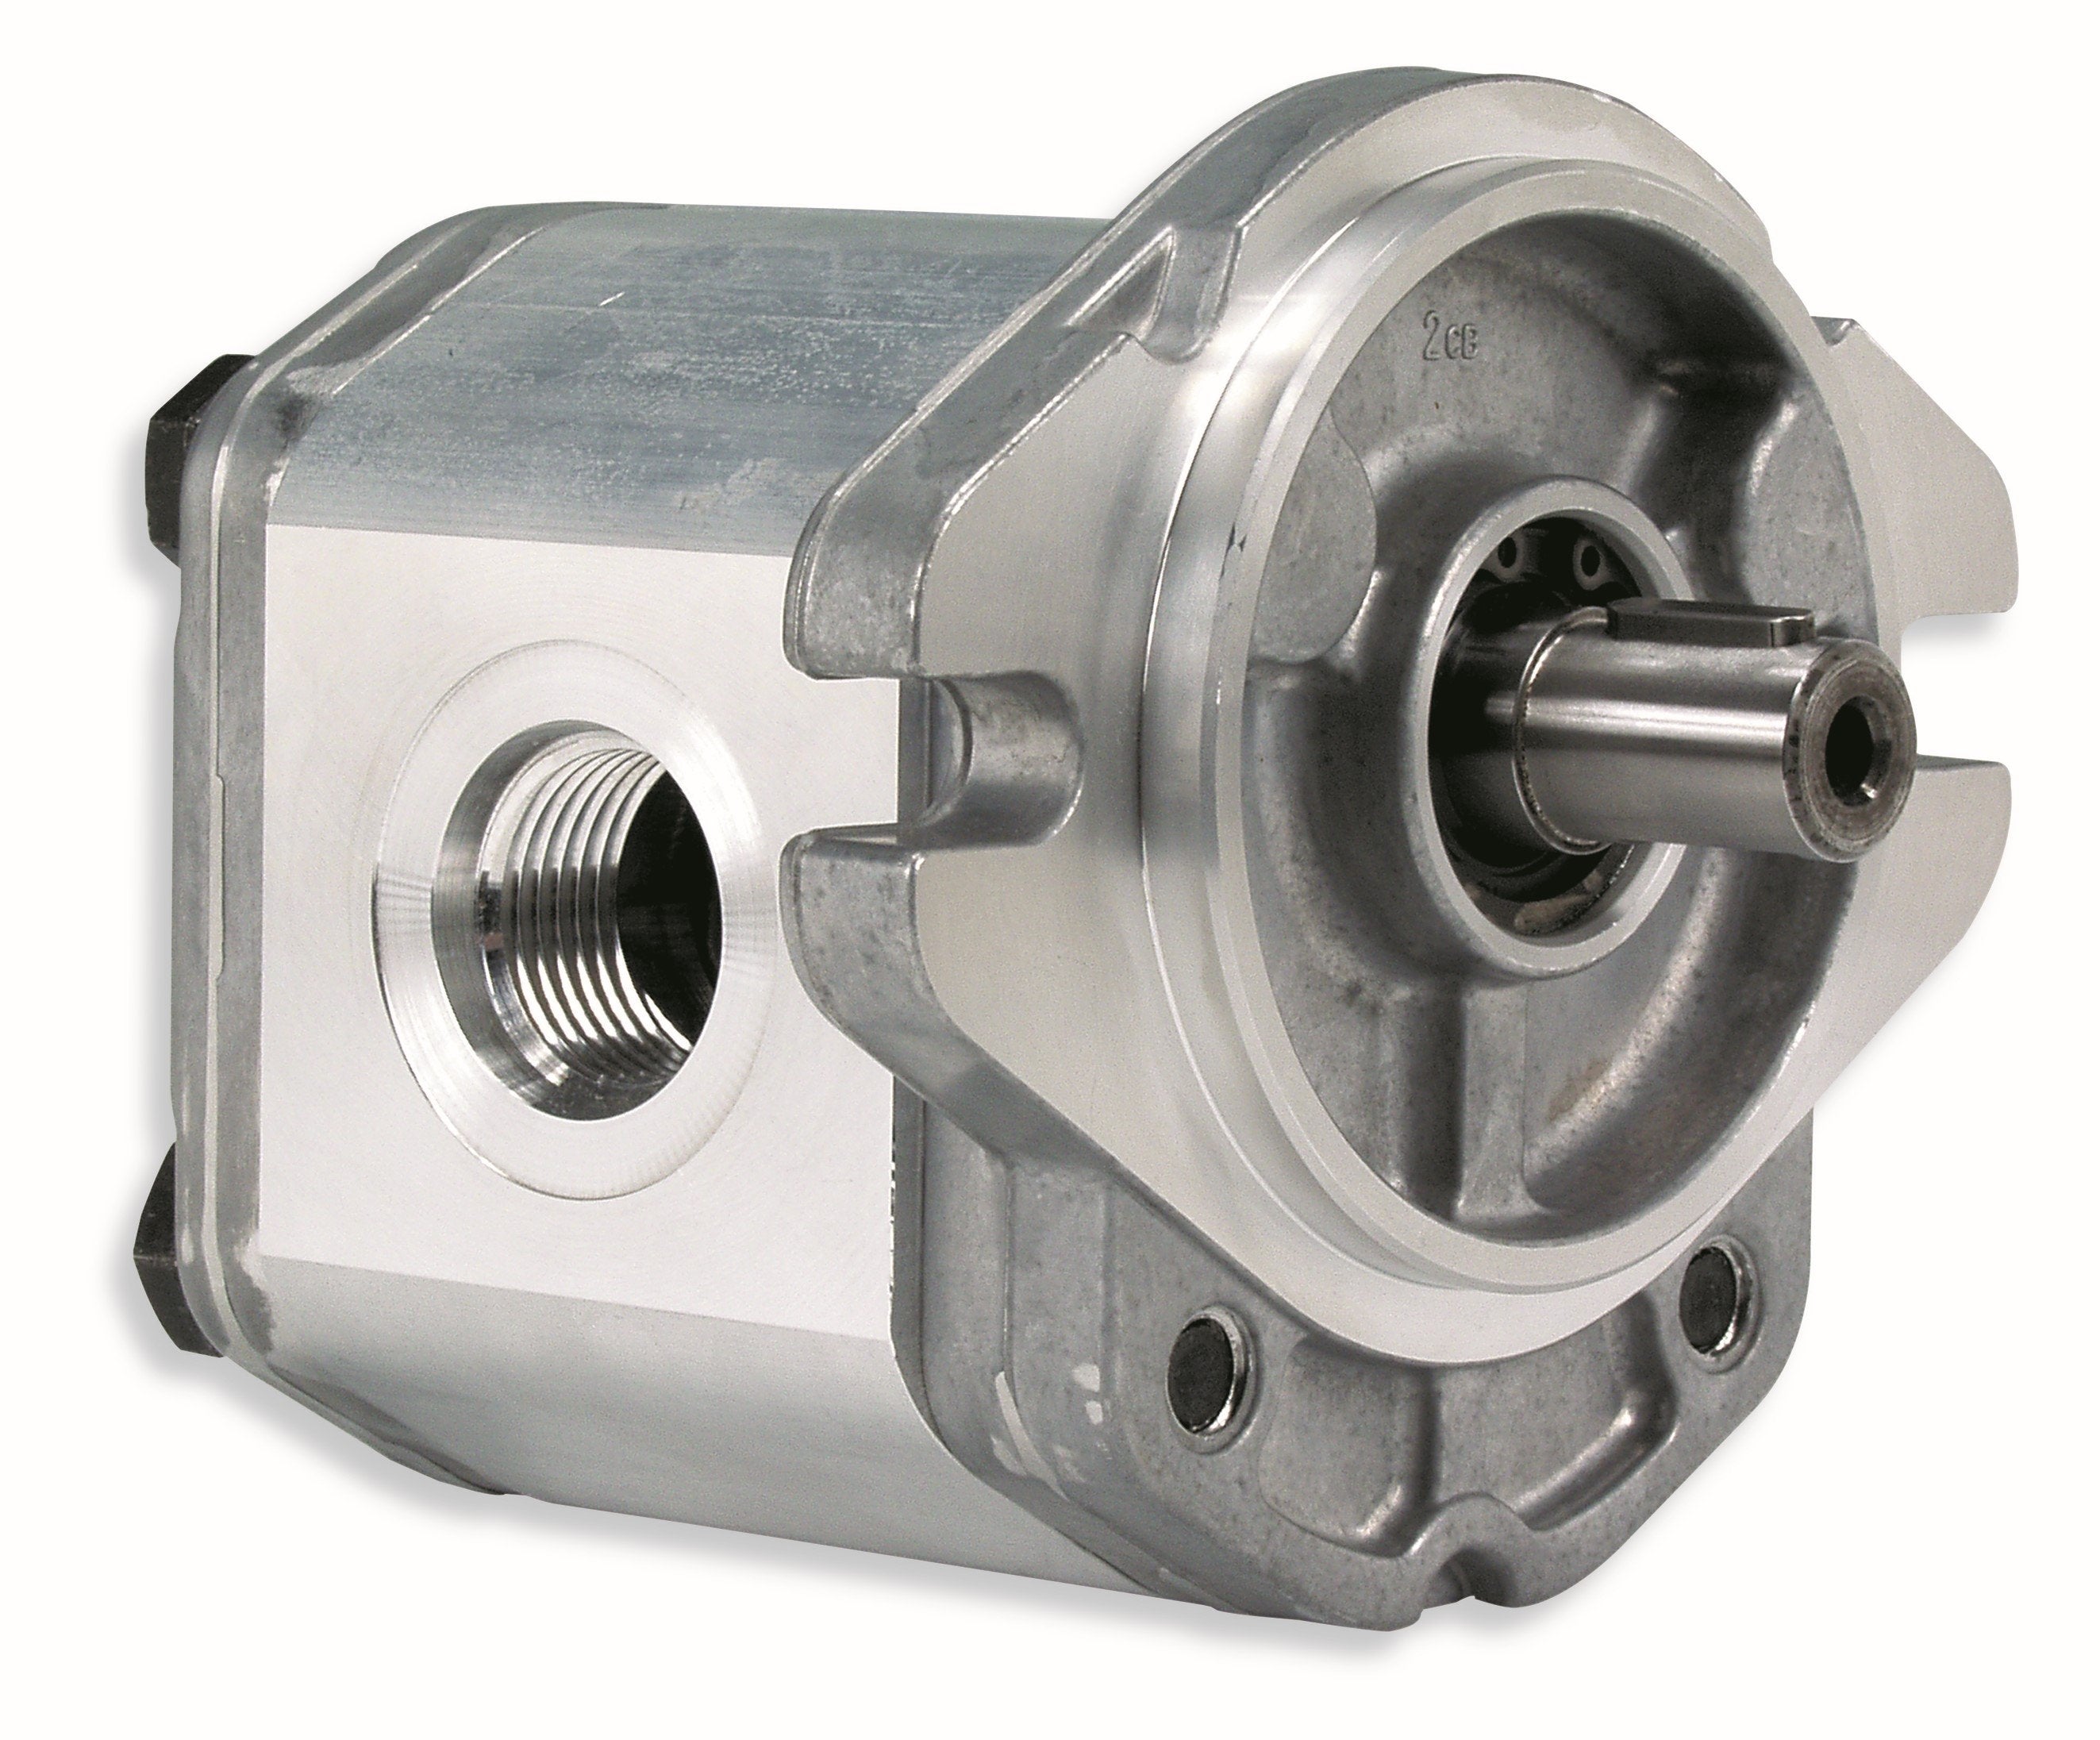 GHM3A-R-110-S1-E4 : Marzocchi Gear Motor, Bidirectional, 71cc, 2900psi rated, 2500RPM, 1.25" Code 61 ports, 13T 16/32DP Splined Shaft